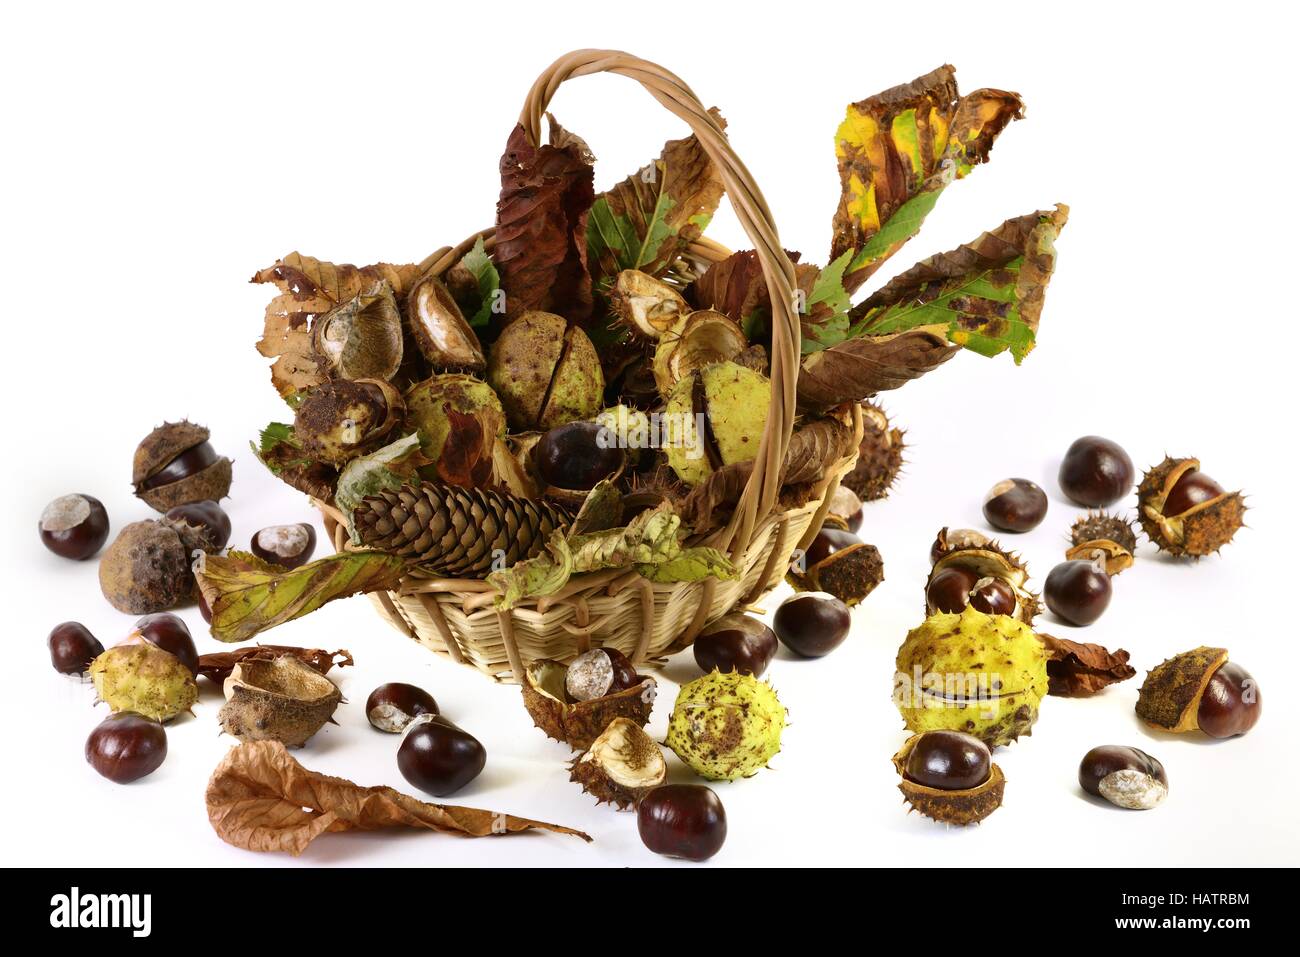 Basket with chestnuts and autumn leaves Stock Photo